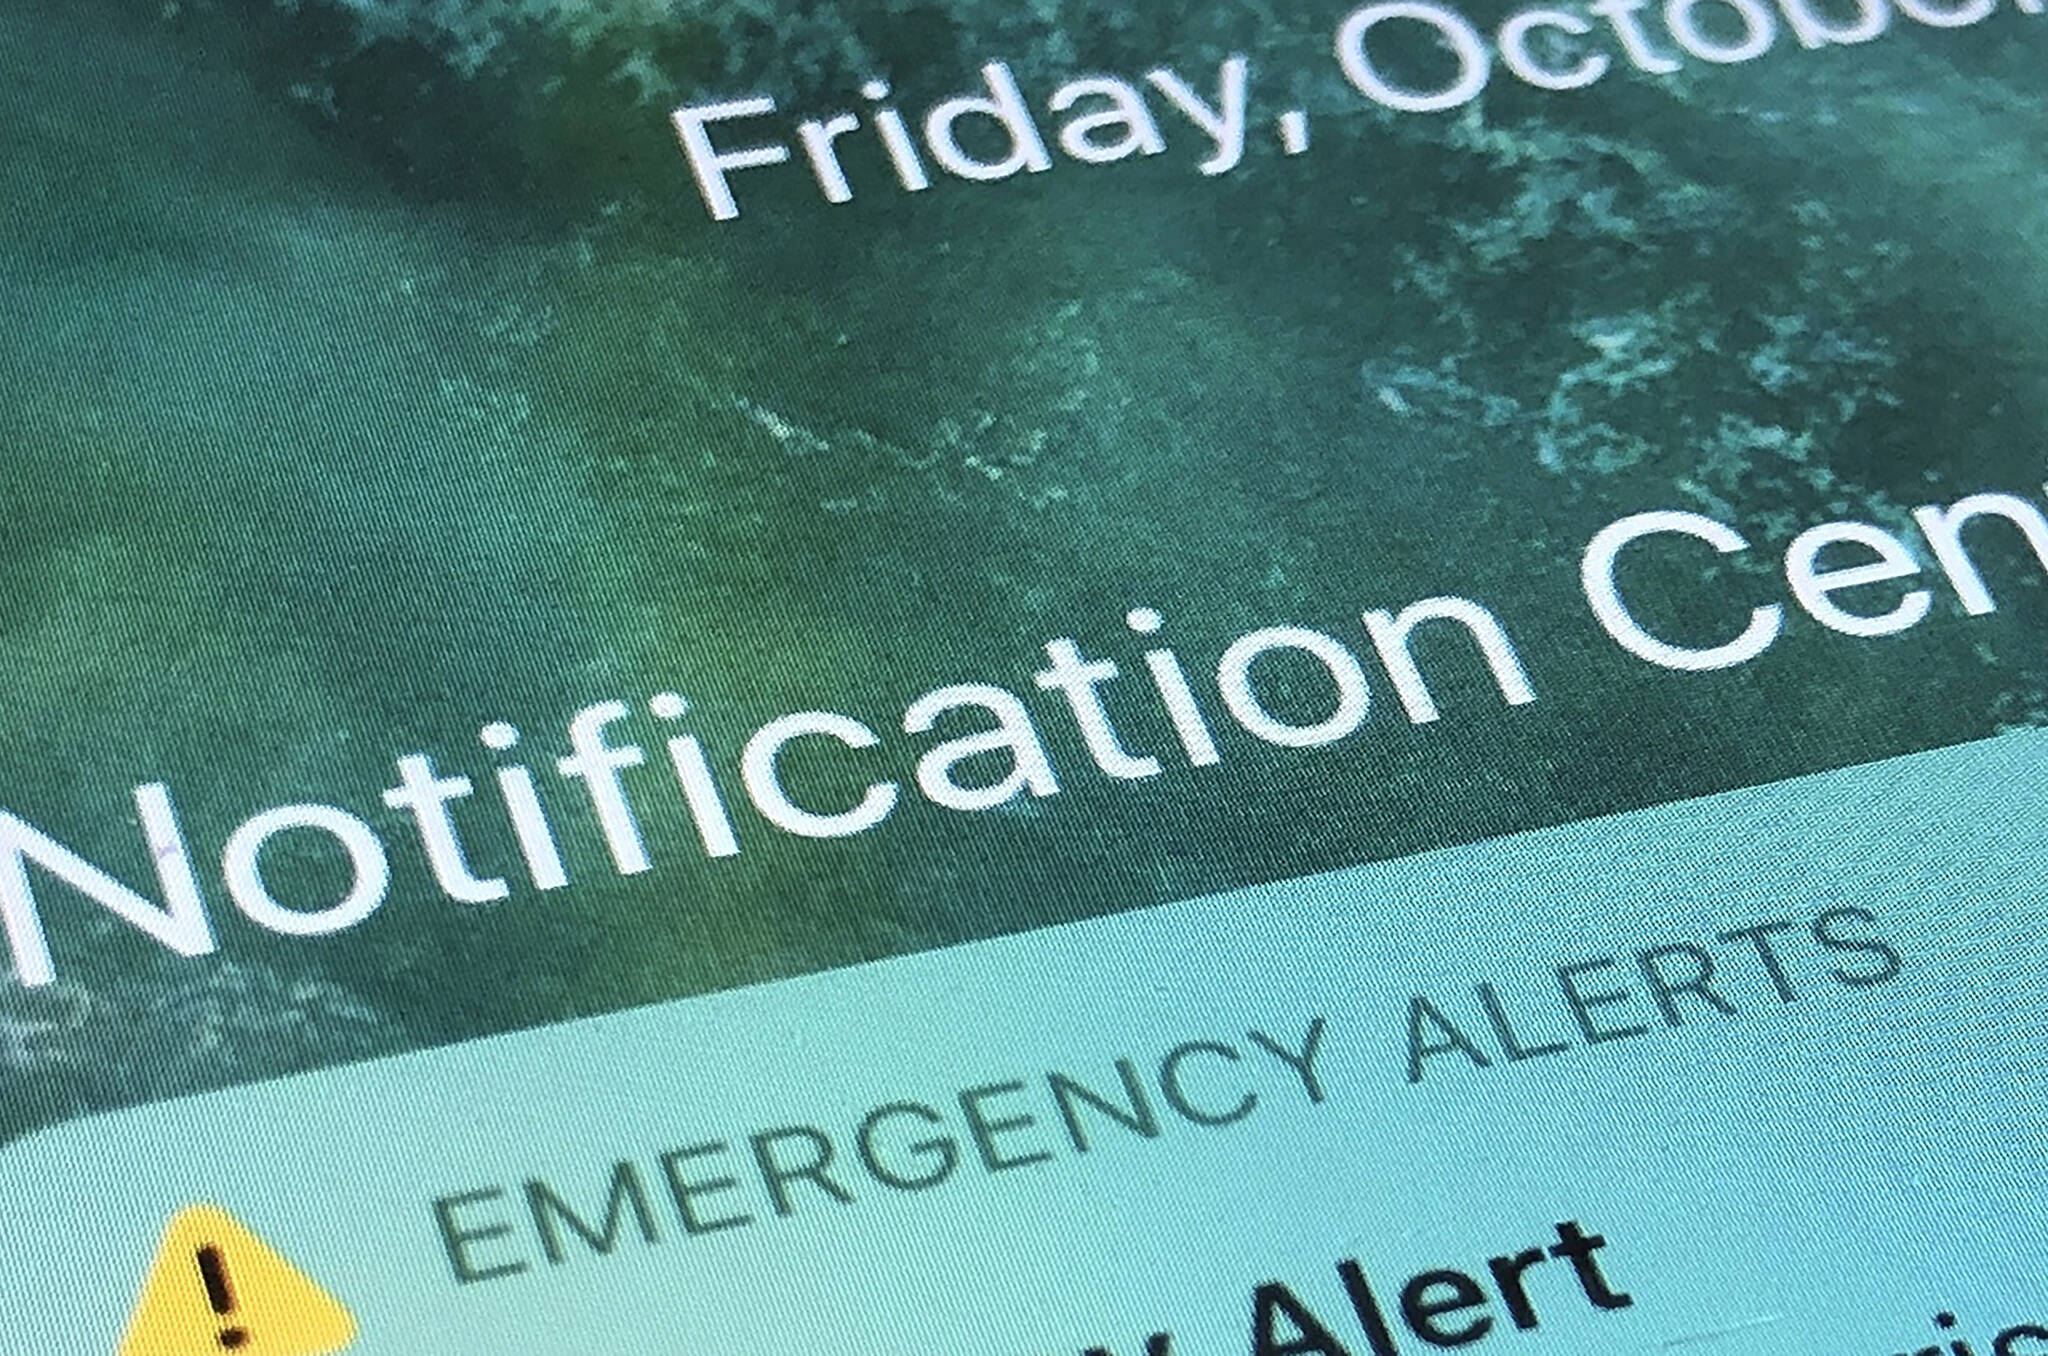 B.C. will be conducting its test of the emergency alert system on Nov. 15, 2023 at 1:55 p.m. (Pacific time) An emergency alert is displayed on a cellphone, Oct. 30, 2020, in Rio Rancho, N.M. (AP Photo/Susan Montoya Bryan, File)